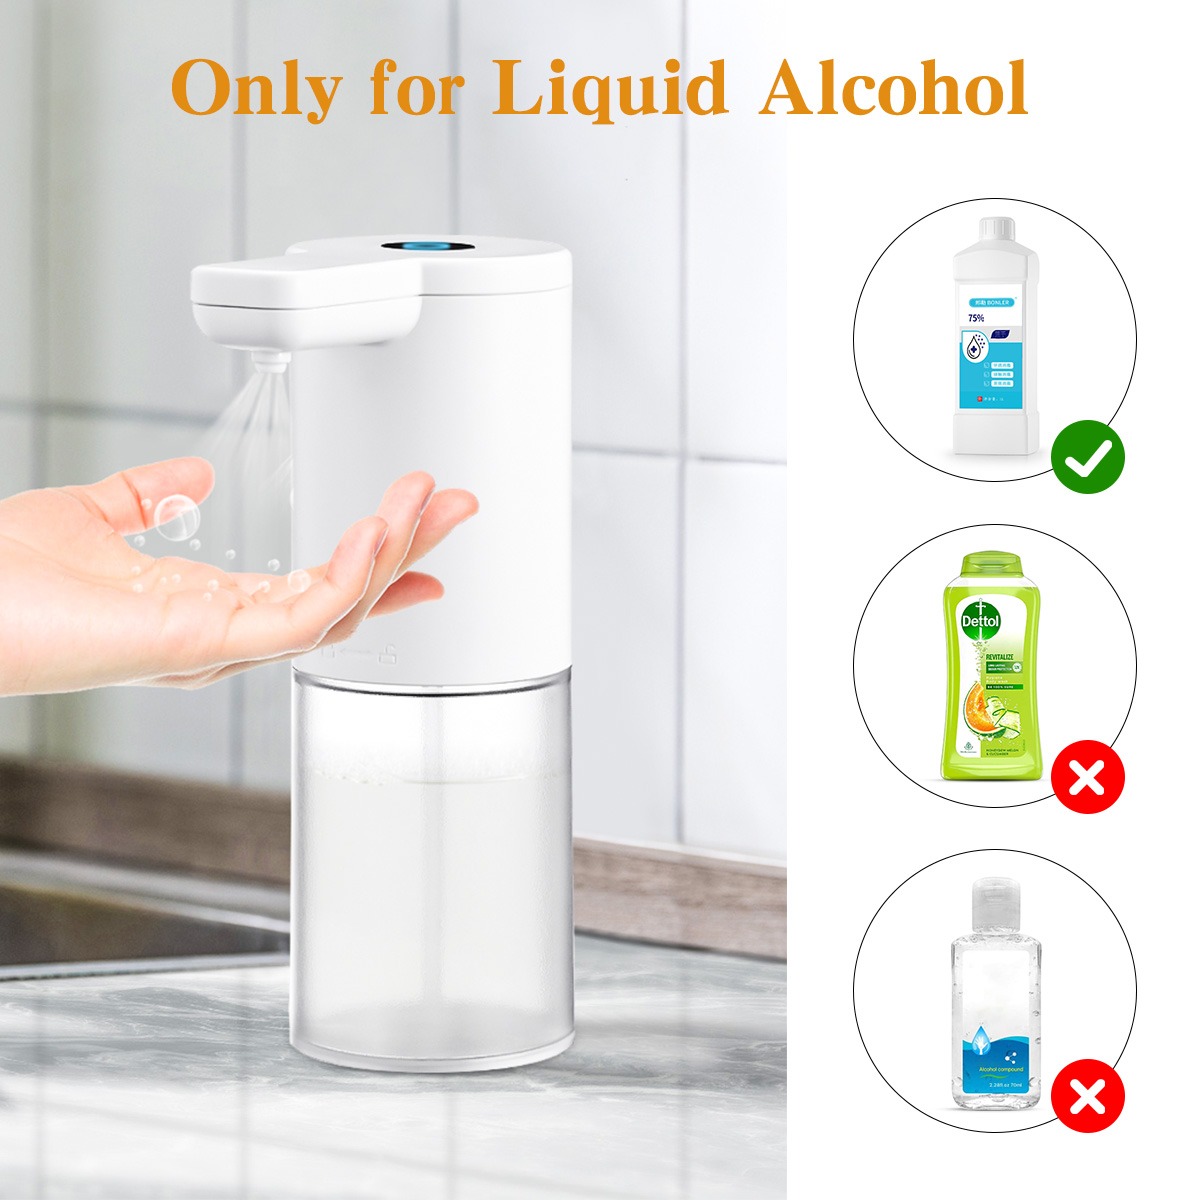 KING-DO-WAY-280ml-Automatic-Contactless-Soap-Dispenser-280ml-Smart-Touchless-Soap-Disinfectant-Dispe-1890640-2